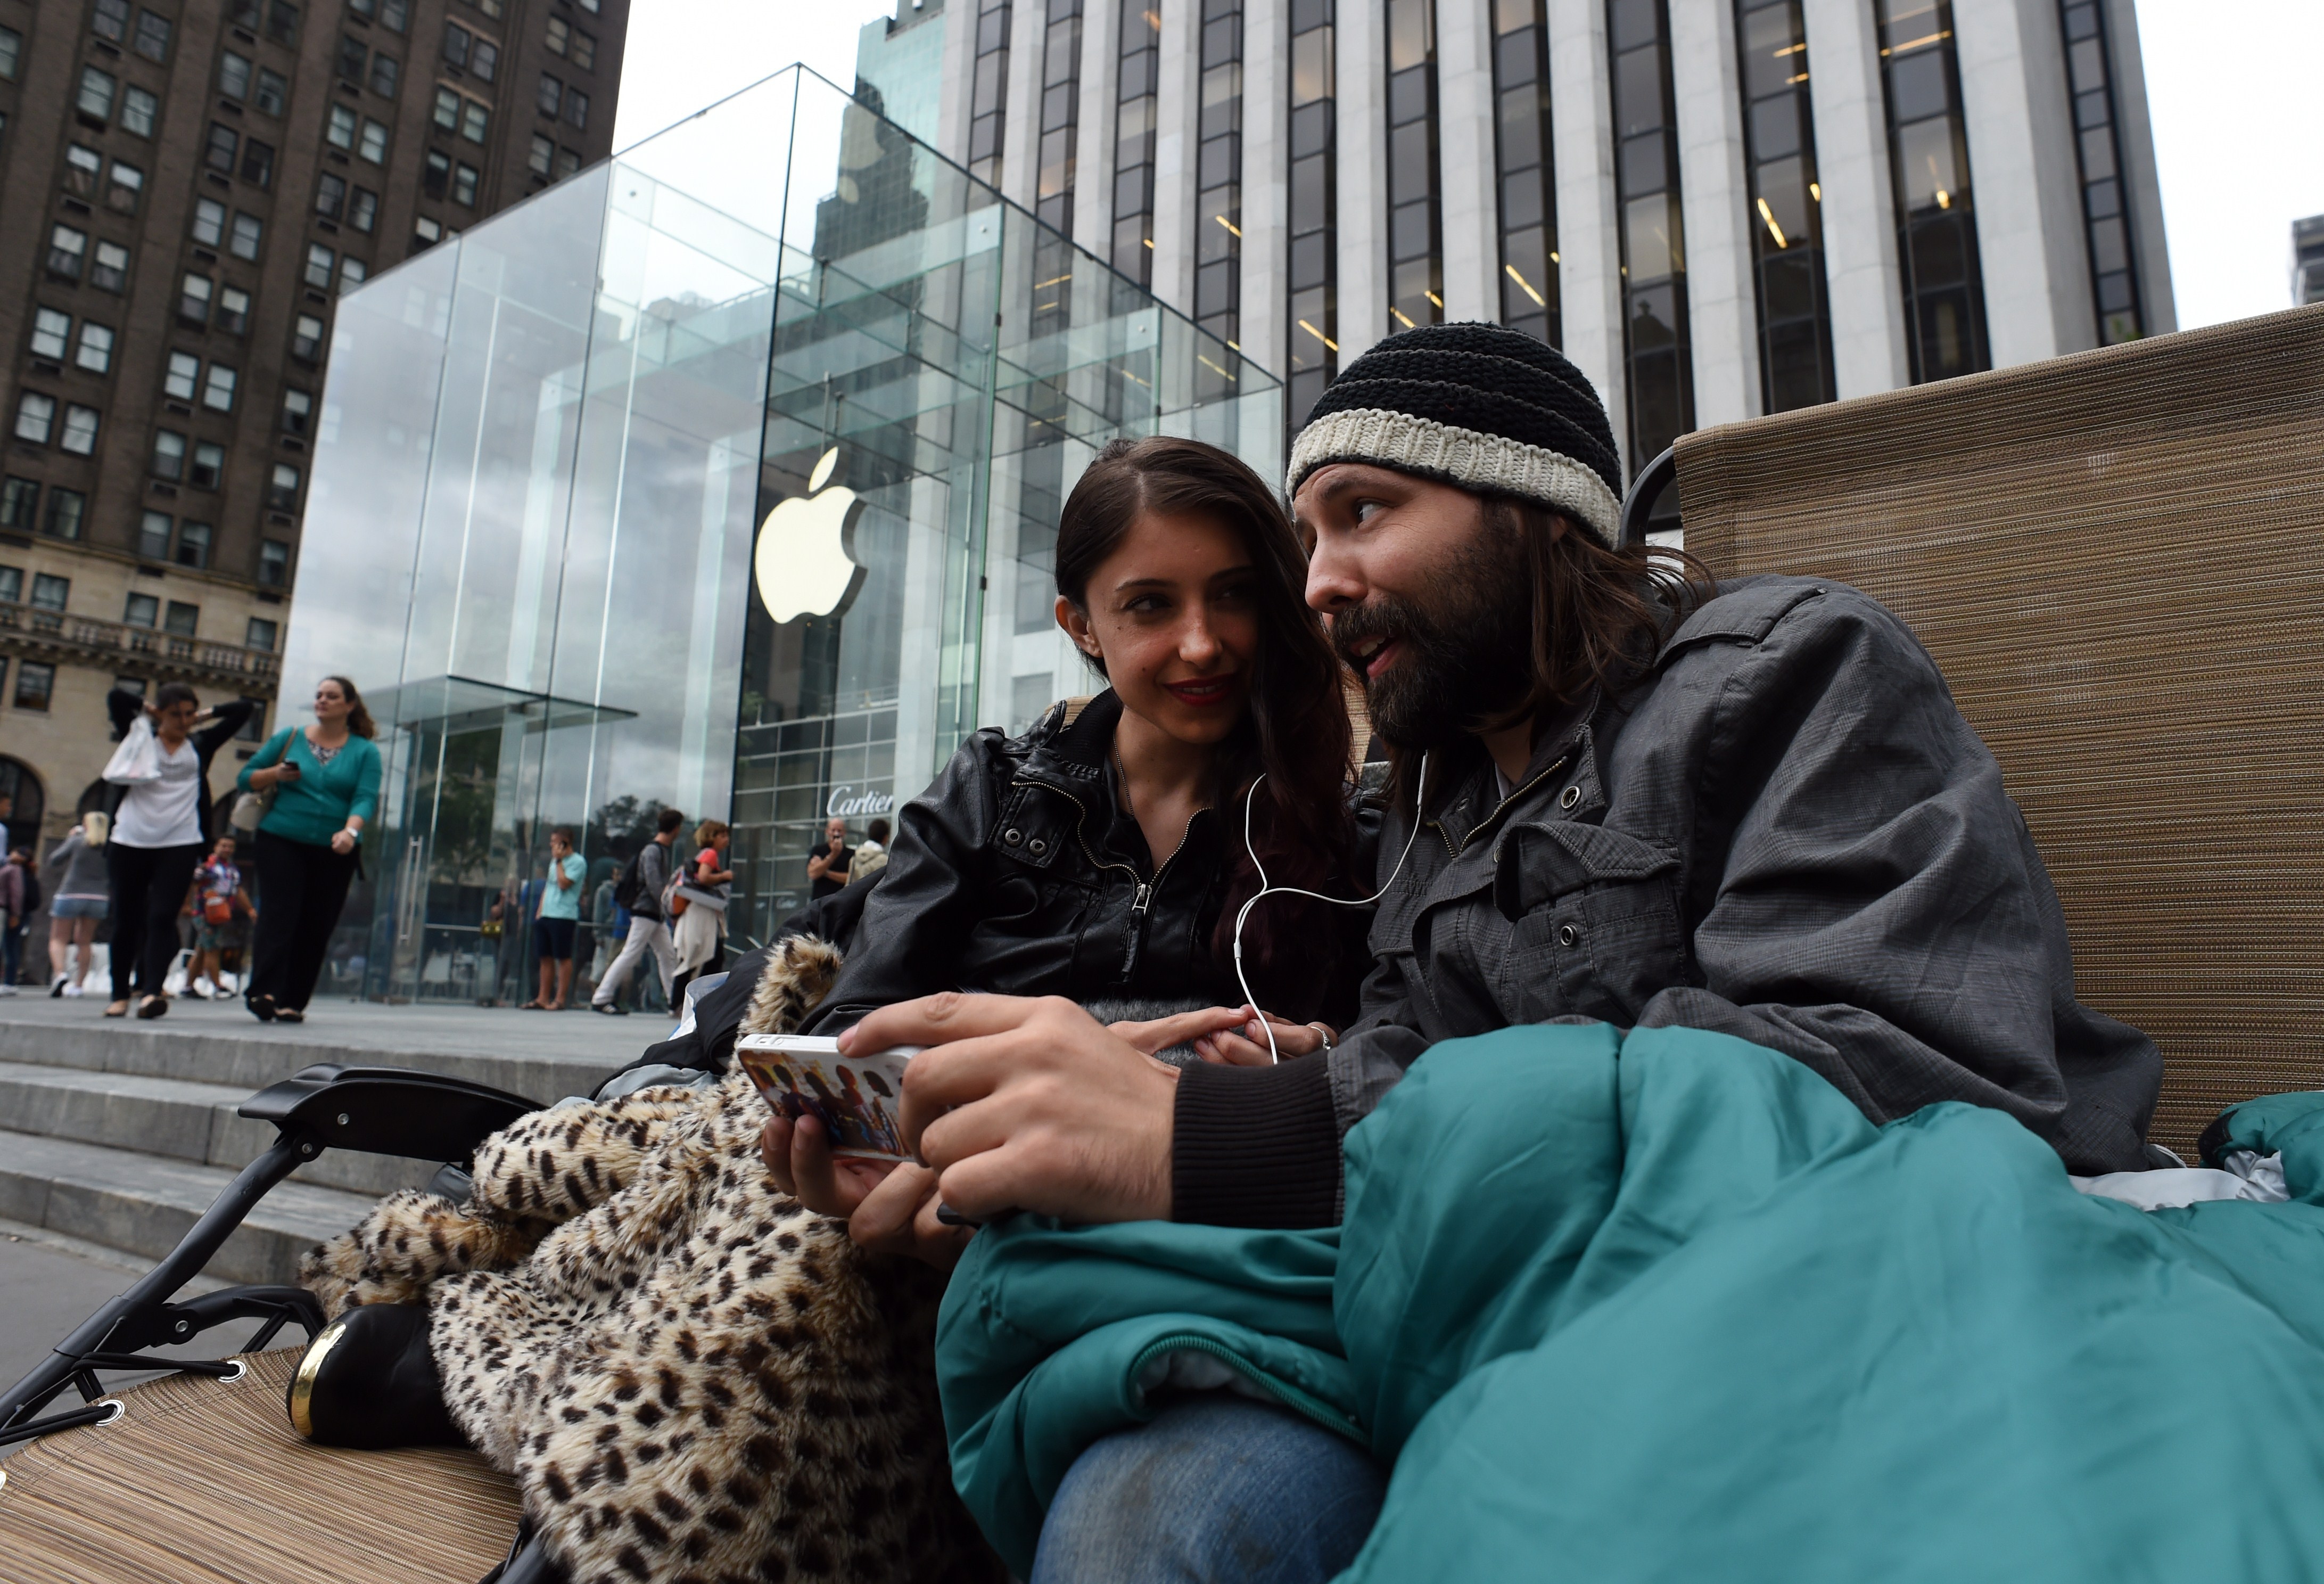 Moon Ray (L) and her husband Jason Ray talk on Skype as they wait in line September 9, 2014 outside the Apple Store on 5th Avenue in New York. (Don Emmert&mdash;AFP/Getty Images)